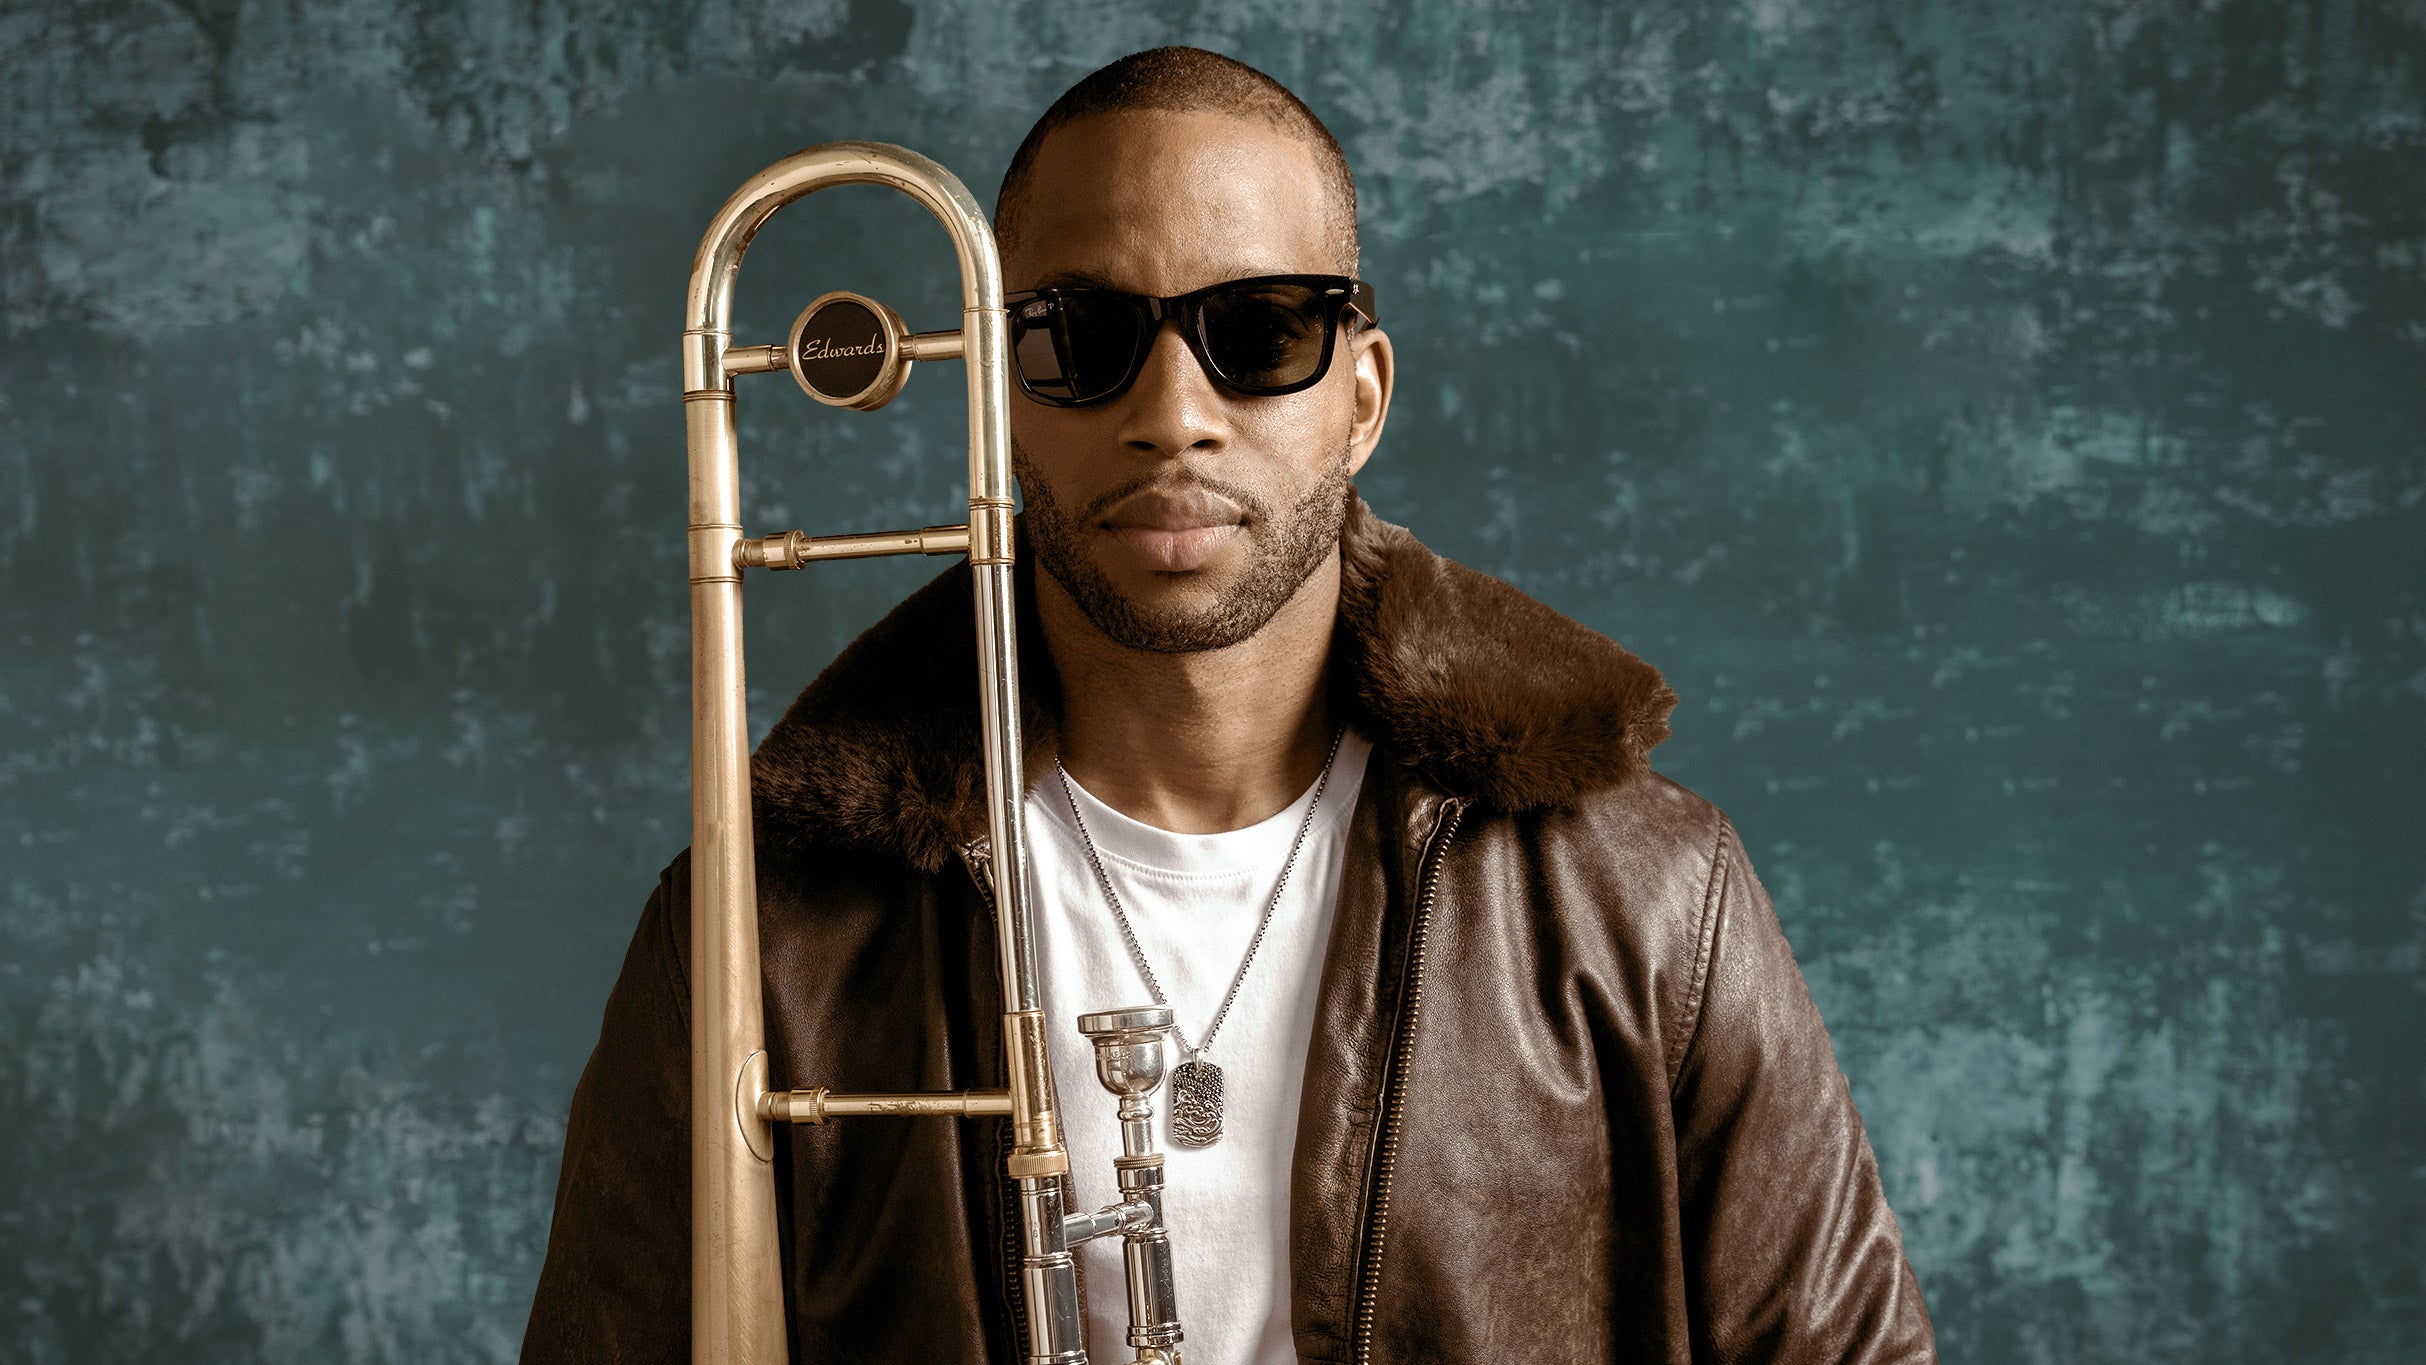 Trombone Shorty & Orleans Avenue and Ziggy Marley